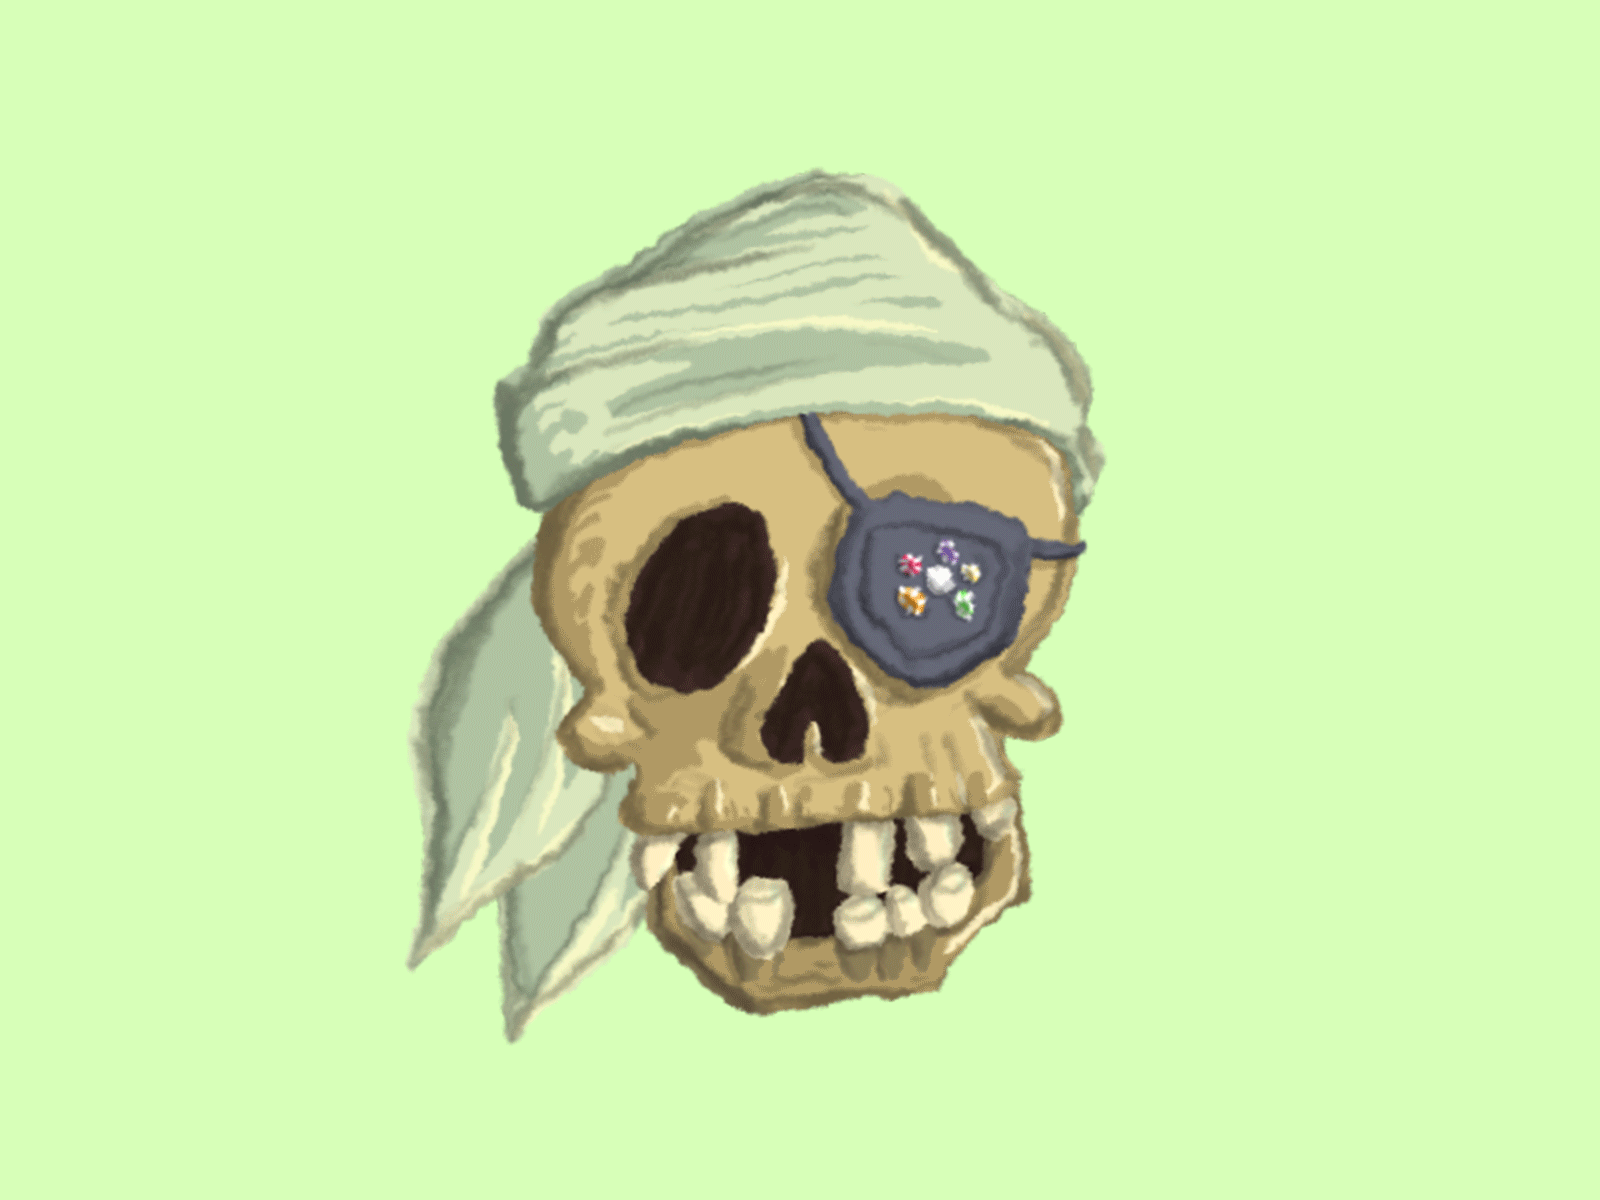 One eyed Willy animated gif animated sticker goonies halloween one eyed willy pirate skeleton skull sticker